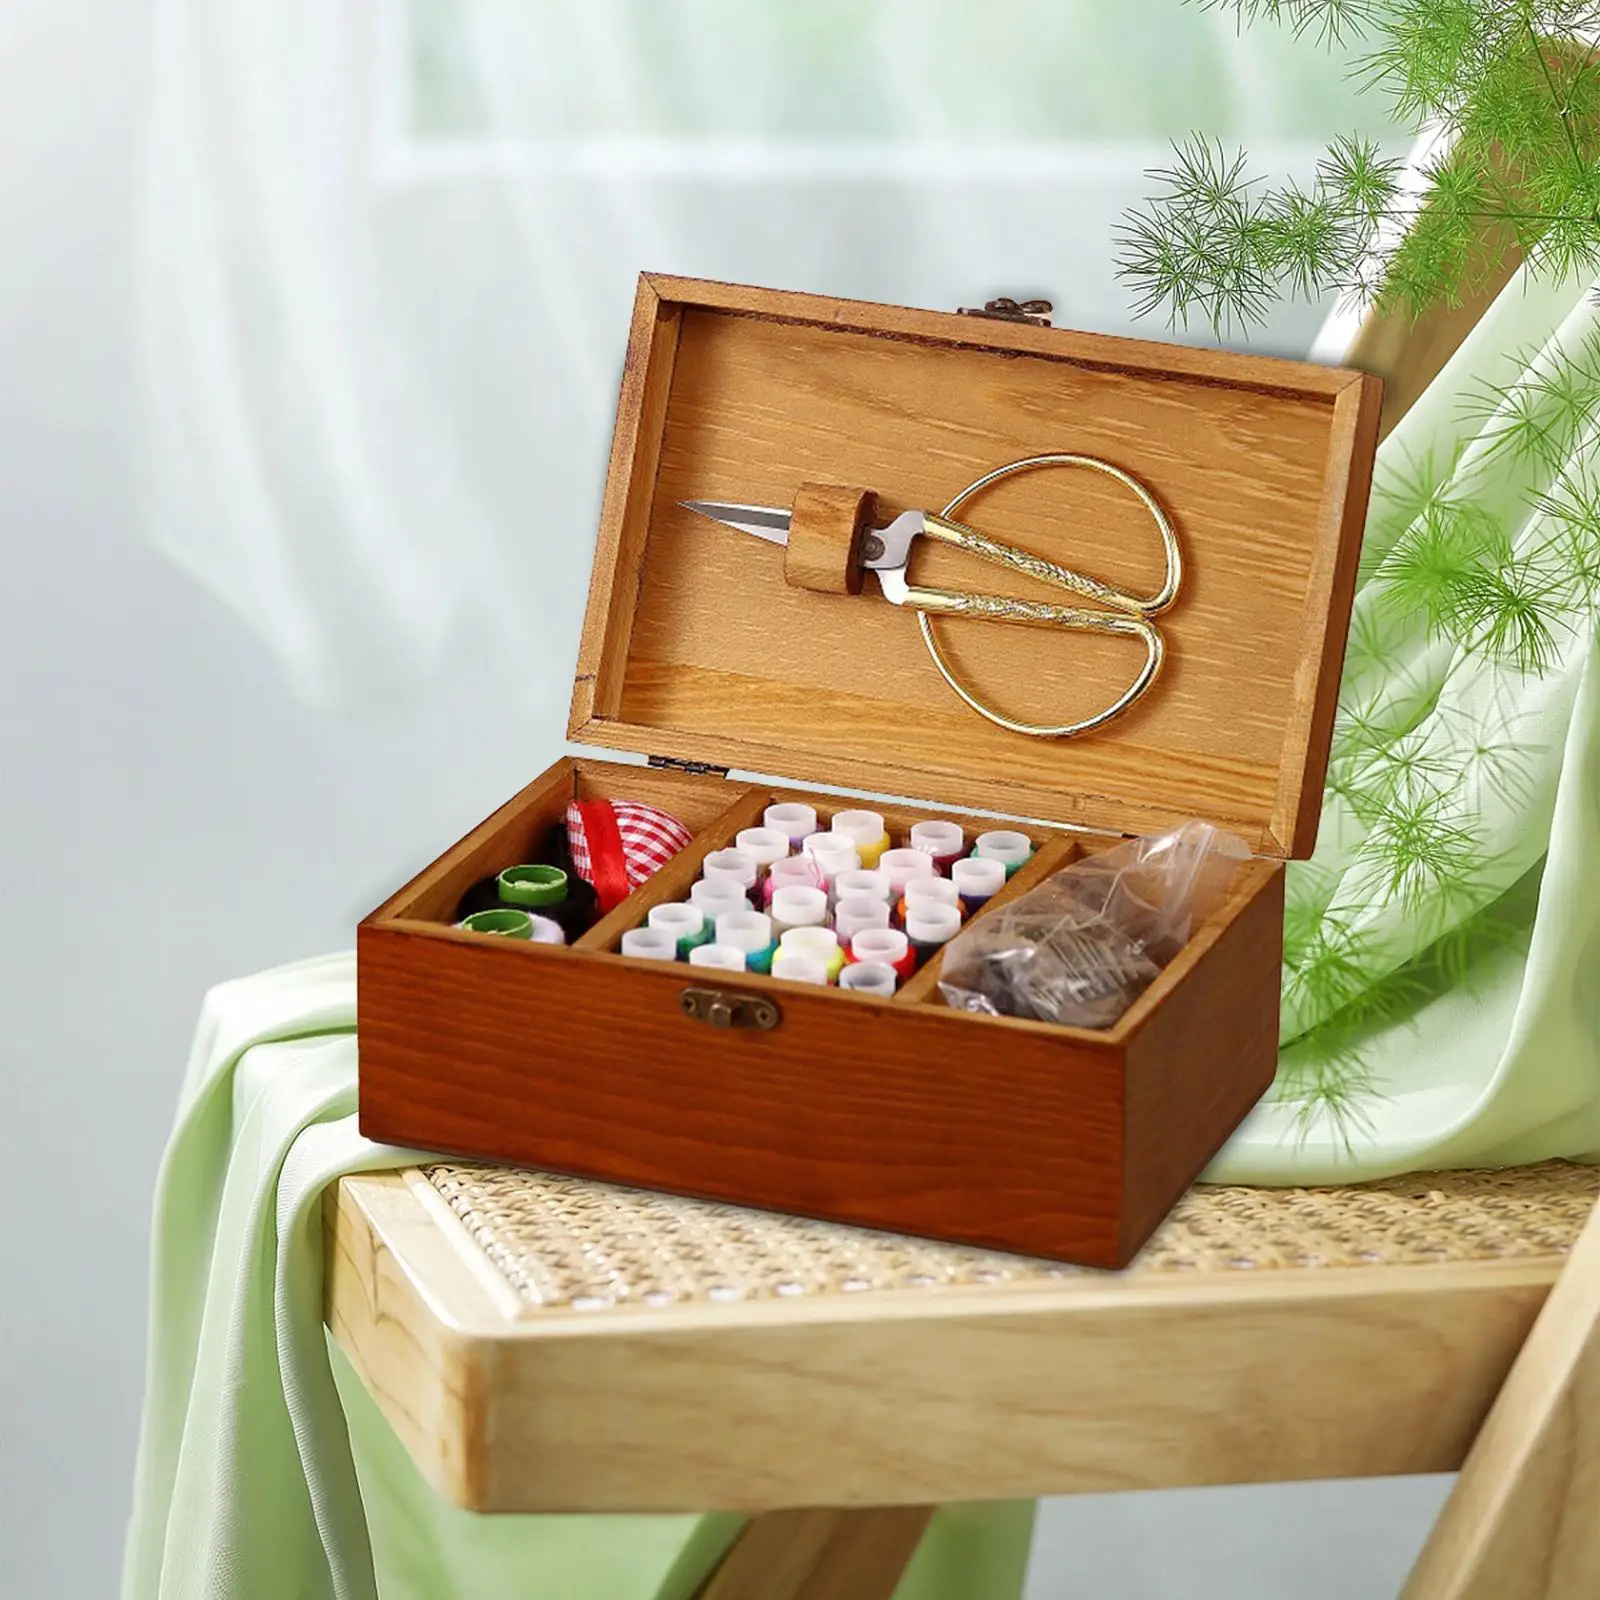 Wooden Sewing Box Empty Box Retro Style for Yarn Needle Buttons Sewing Storage Box Multifunction Sewing Tools Needlework Box